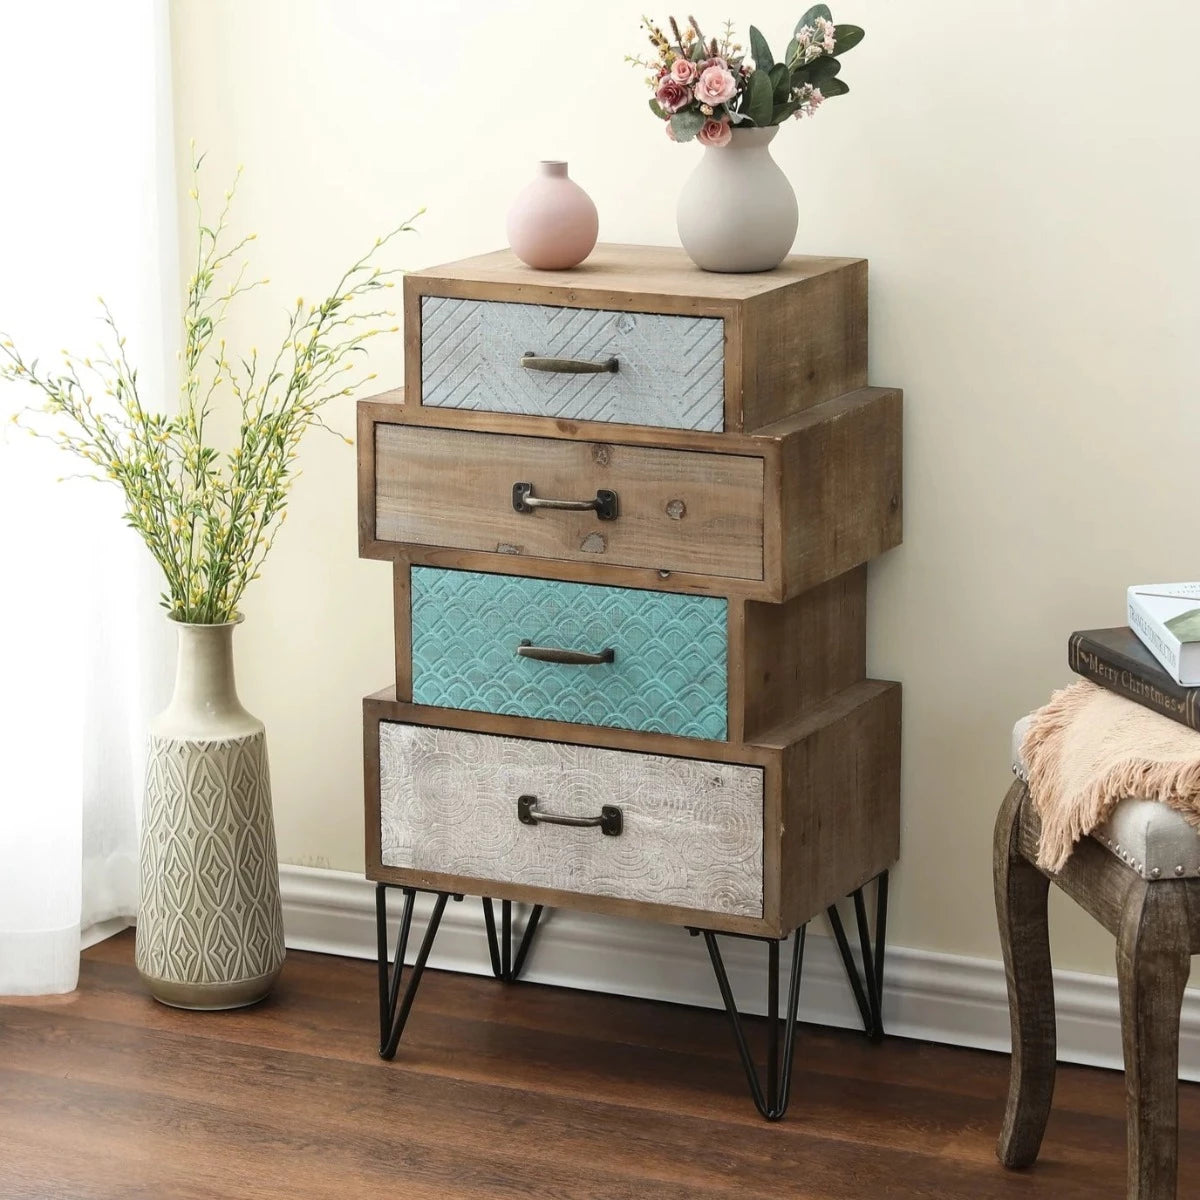 Kayden Chest of Drawers